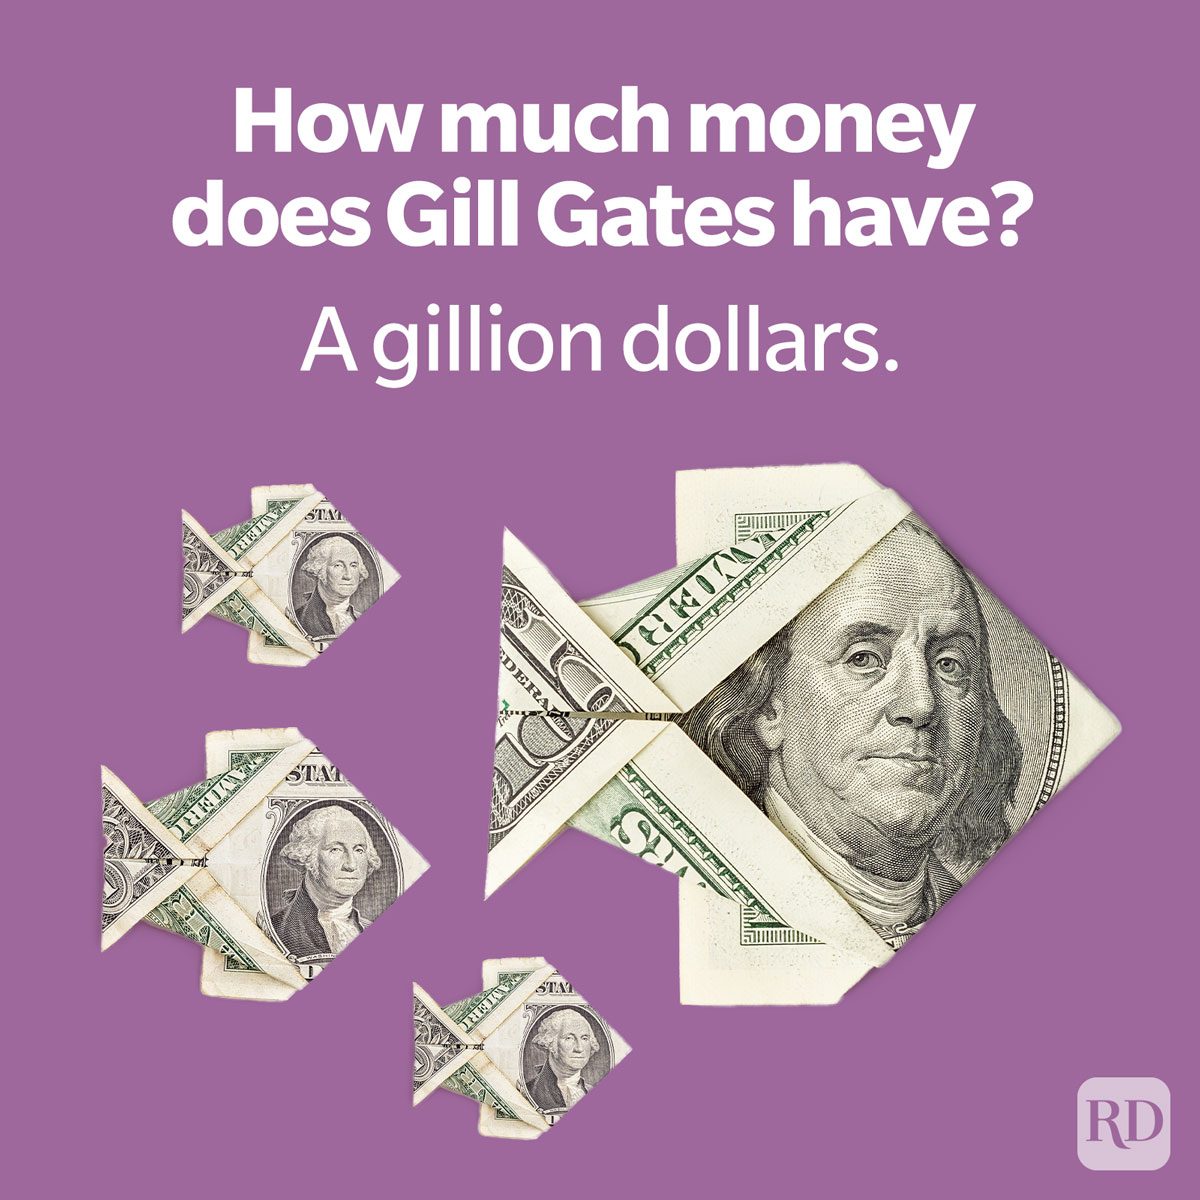 fish joke about Gill Gates having a gillion dollars on purble background